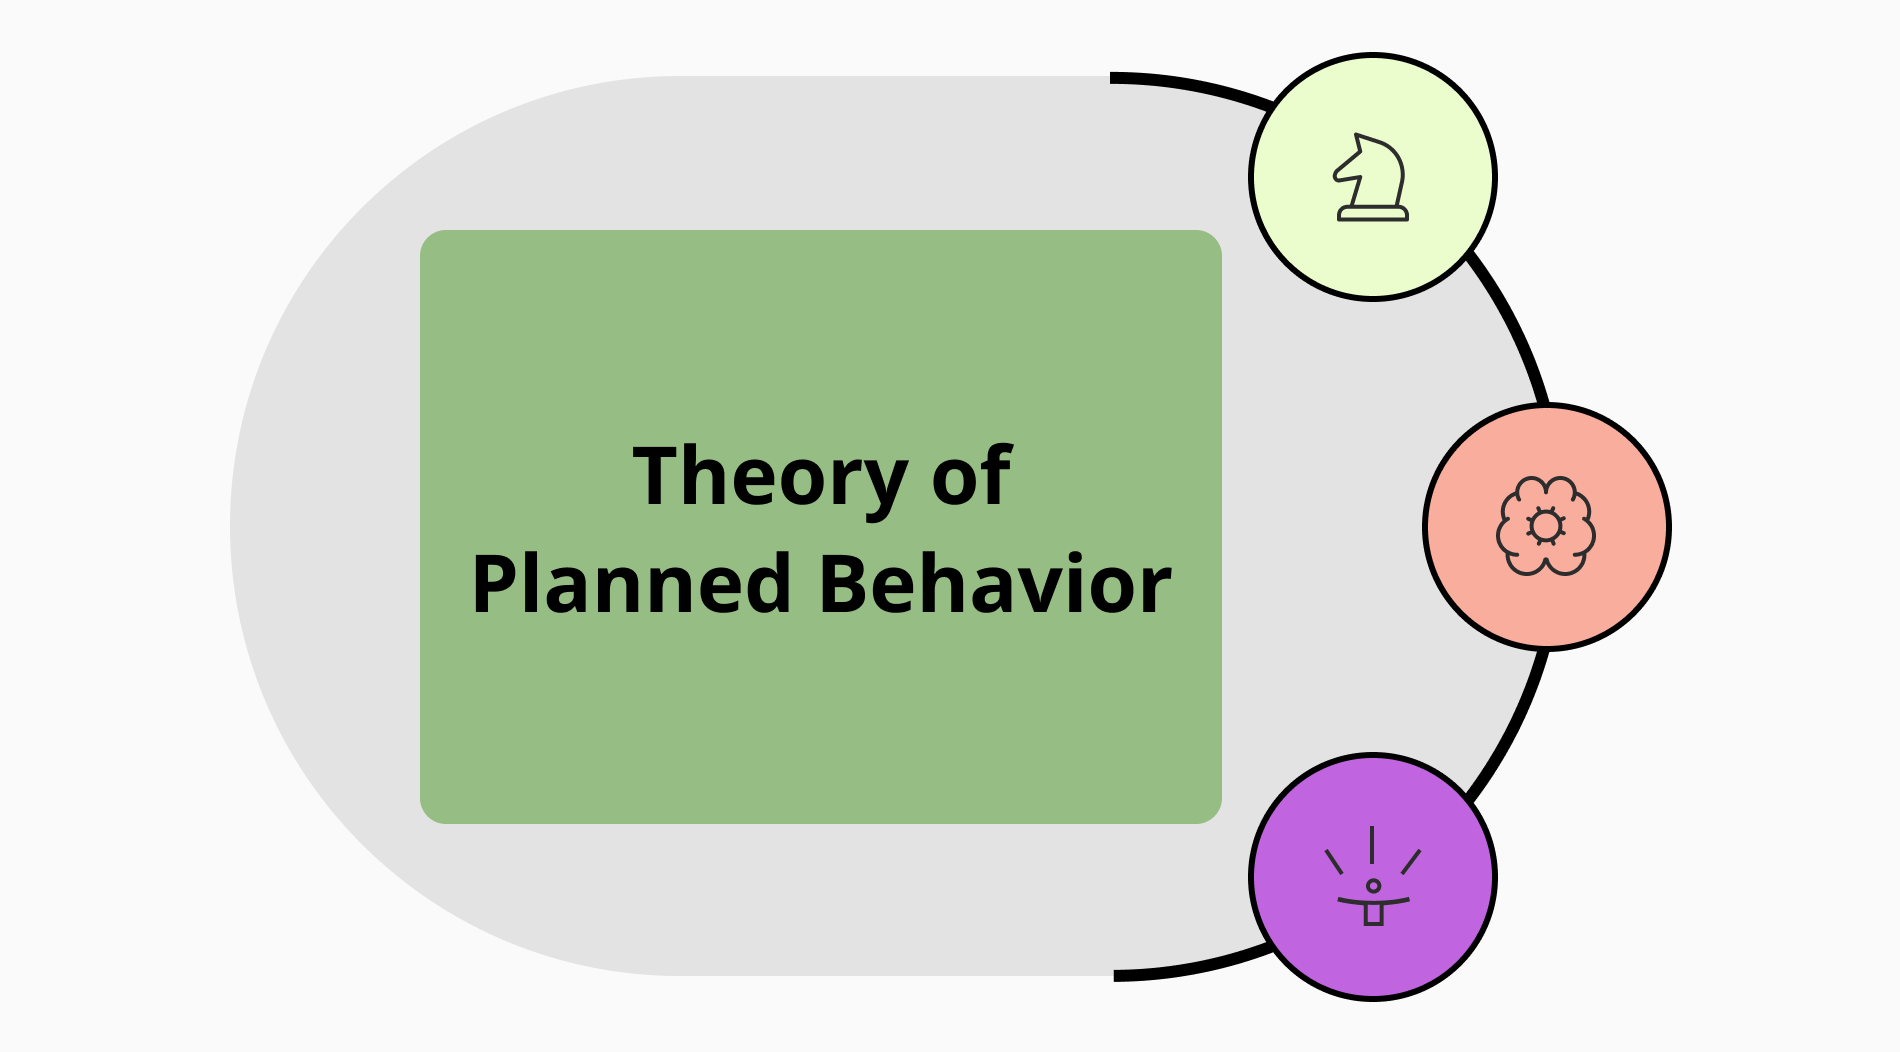 The theory of planned behavior: Definition, model & examples